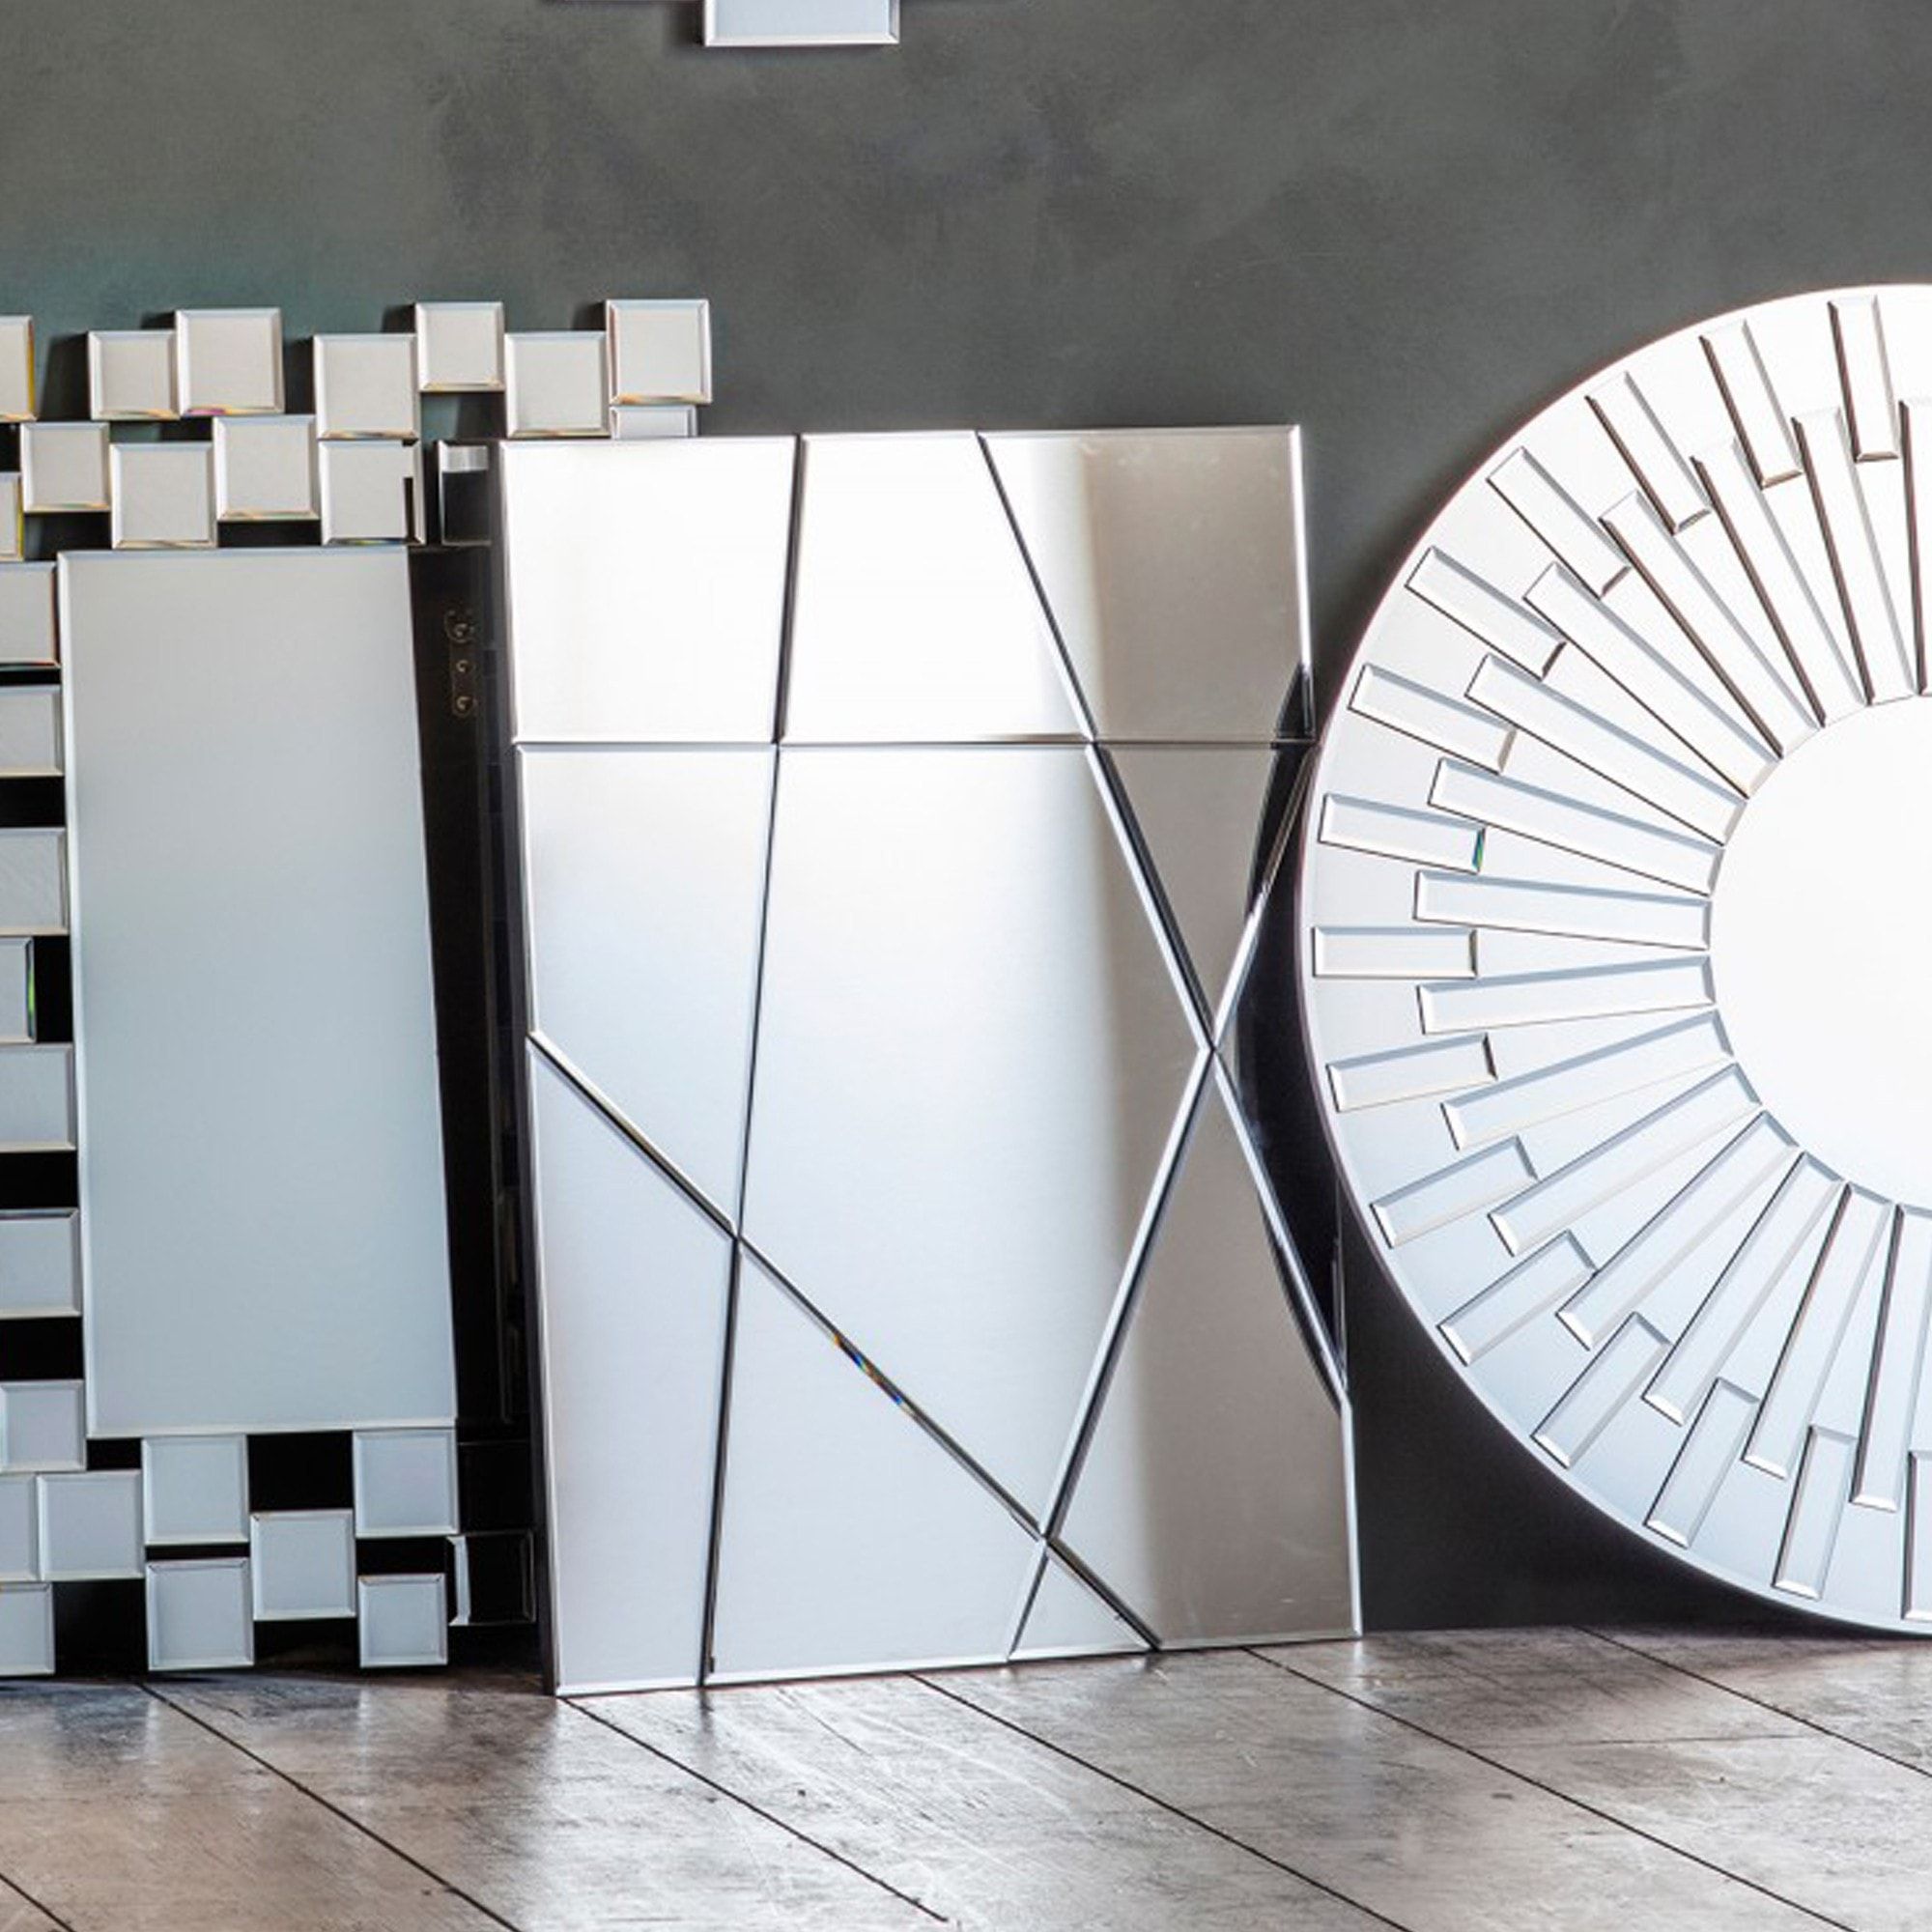 Galaxy Mirror | Wall Mirrors | Modern Mirrors With Regard To Sartain Modern & Contemporary Wall Mirrors (View 15 of 15)